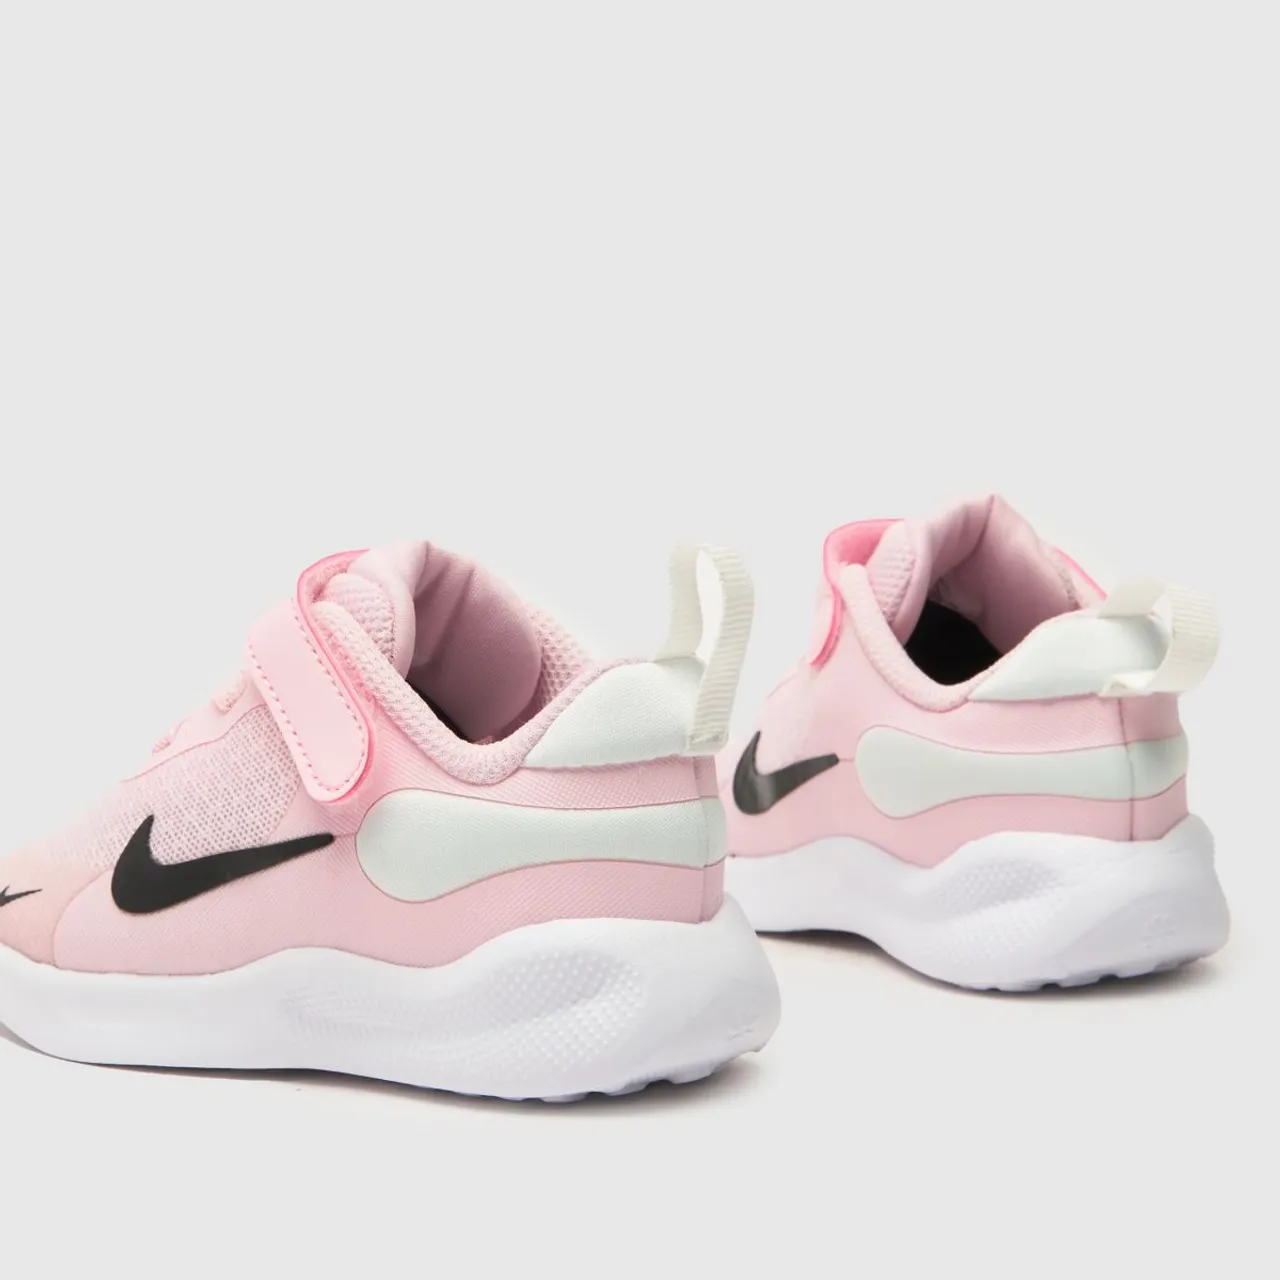 Nike Pale Pink Revolution 7 Girls Toddler Trainers